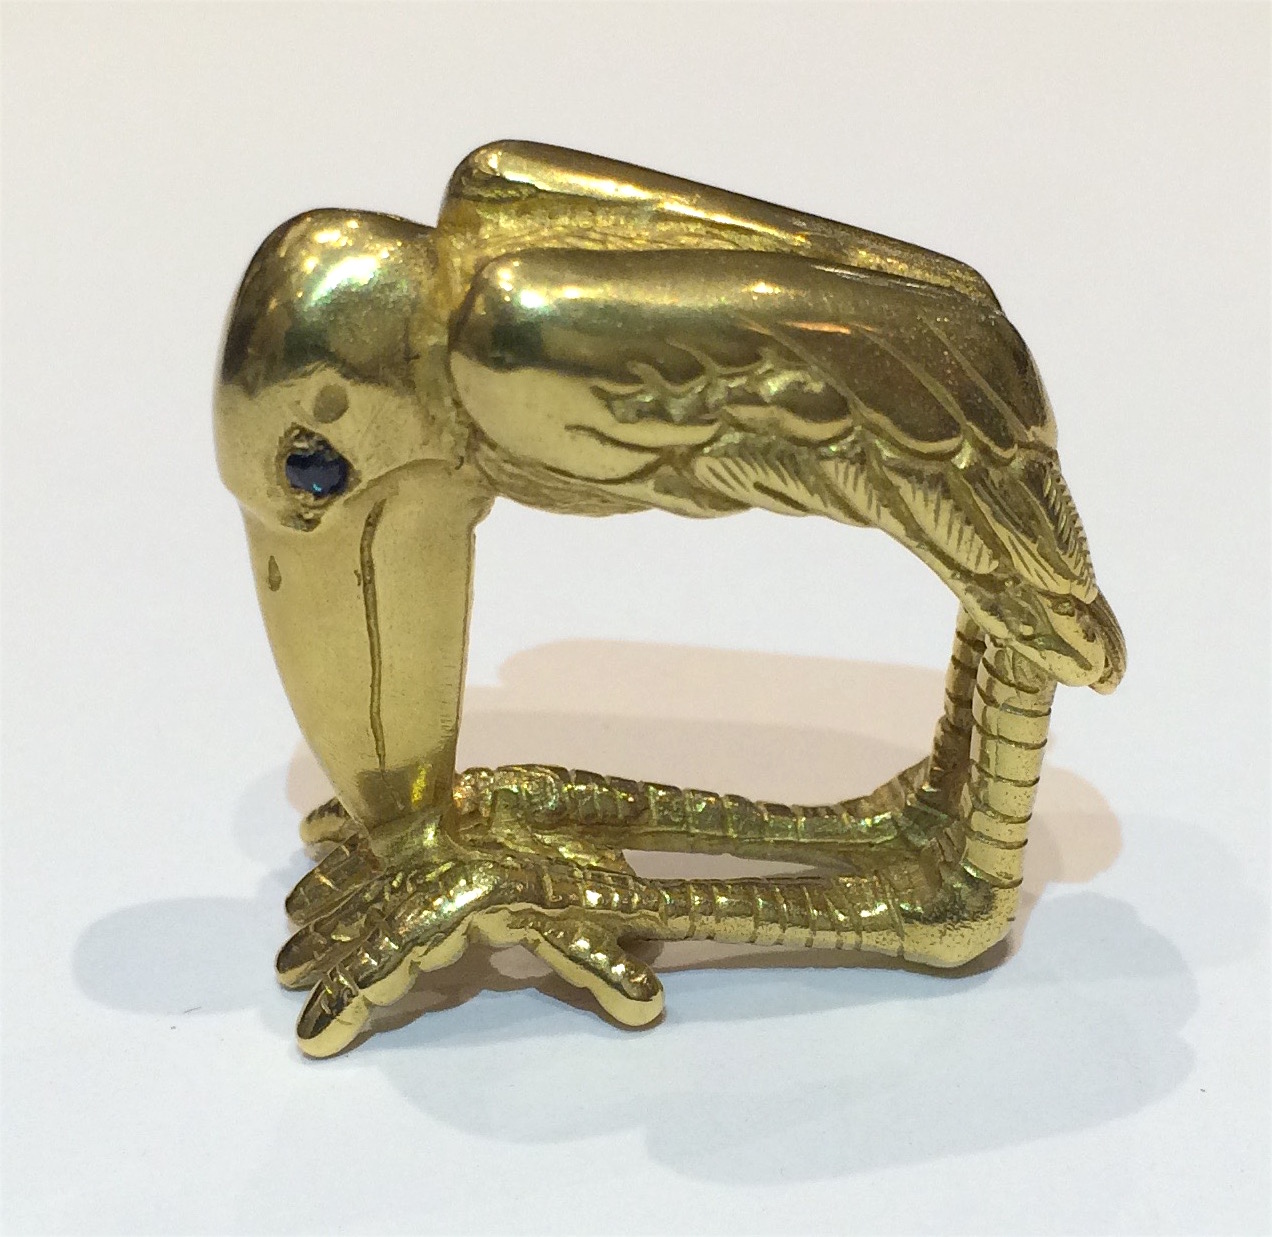 Moshe Oved (1883-1958) “Marabou Stork” ring, hand tooled lost wax 18K gold casting in full dimension as a complete biomorphic form of the bird and set with sapphire eyes,  c.1940